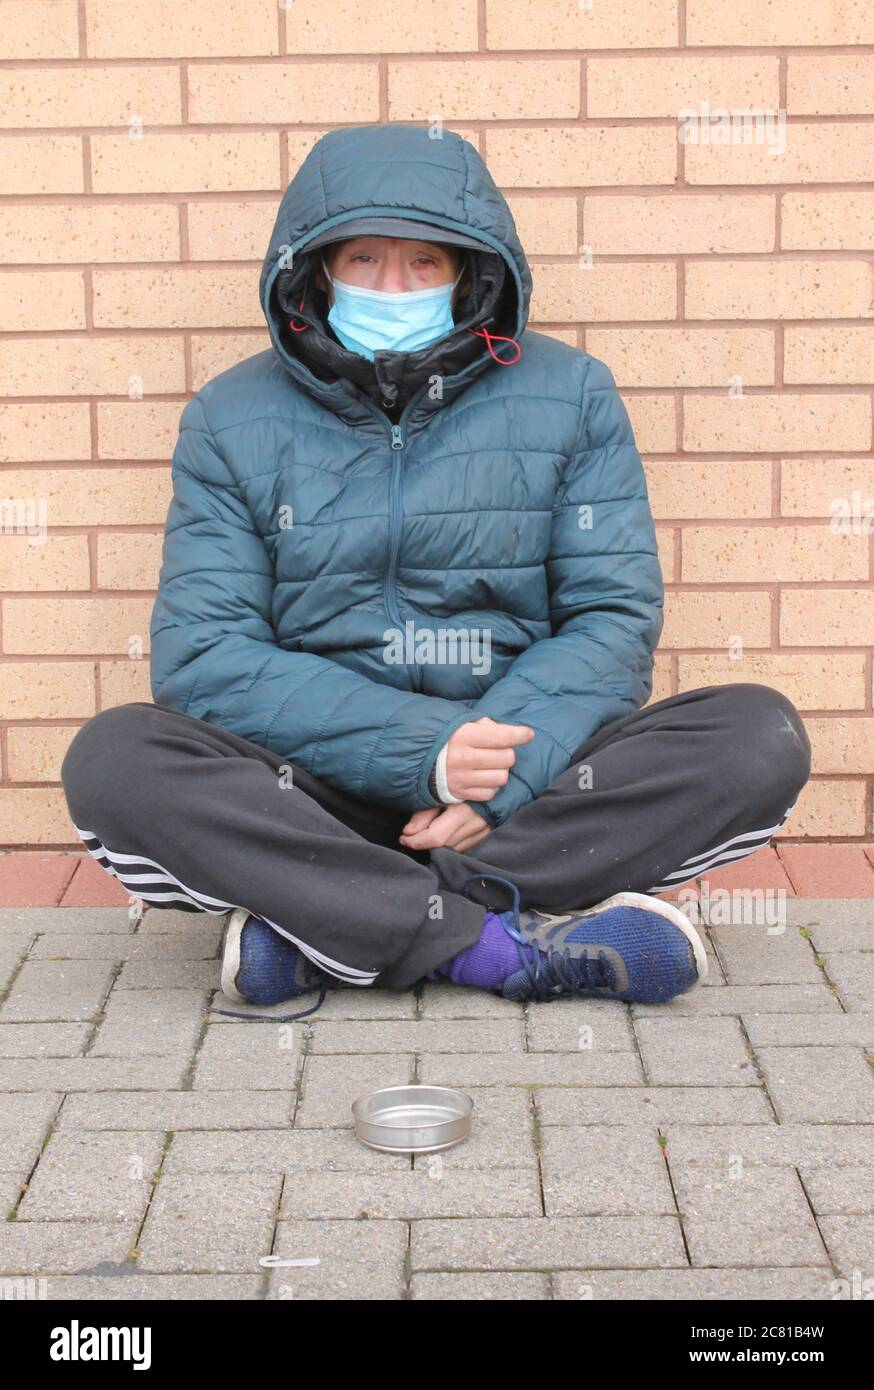 Homeless women with bruised eye, wearing a blue mask sitting on the floor with legs crossed begging for change Stock Photo